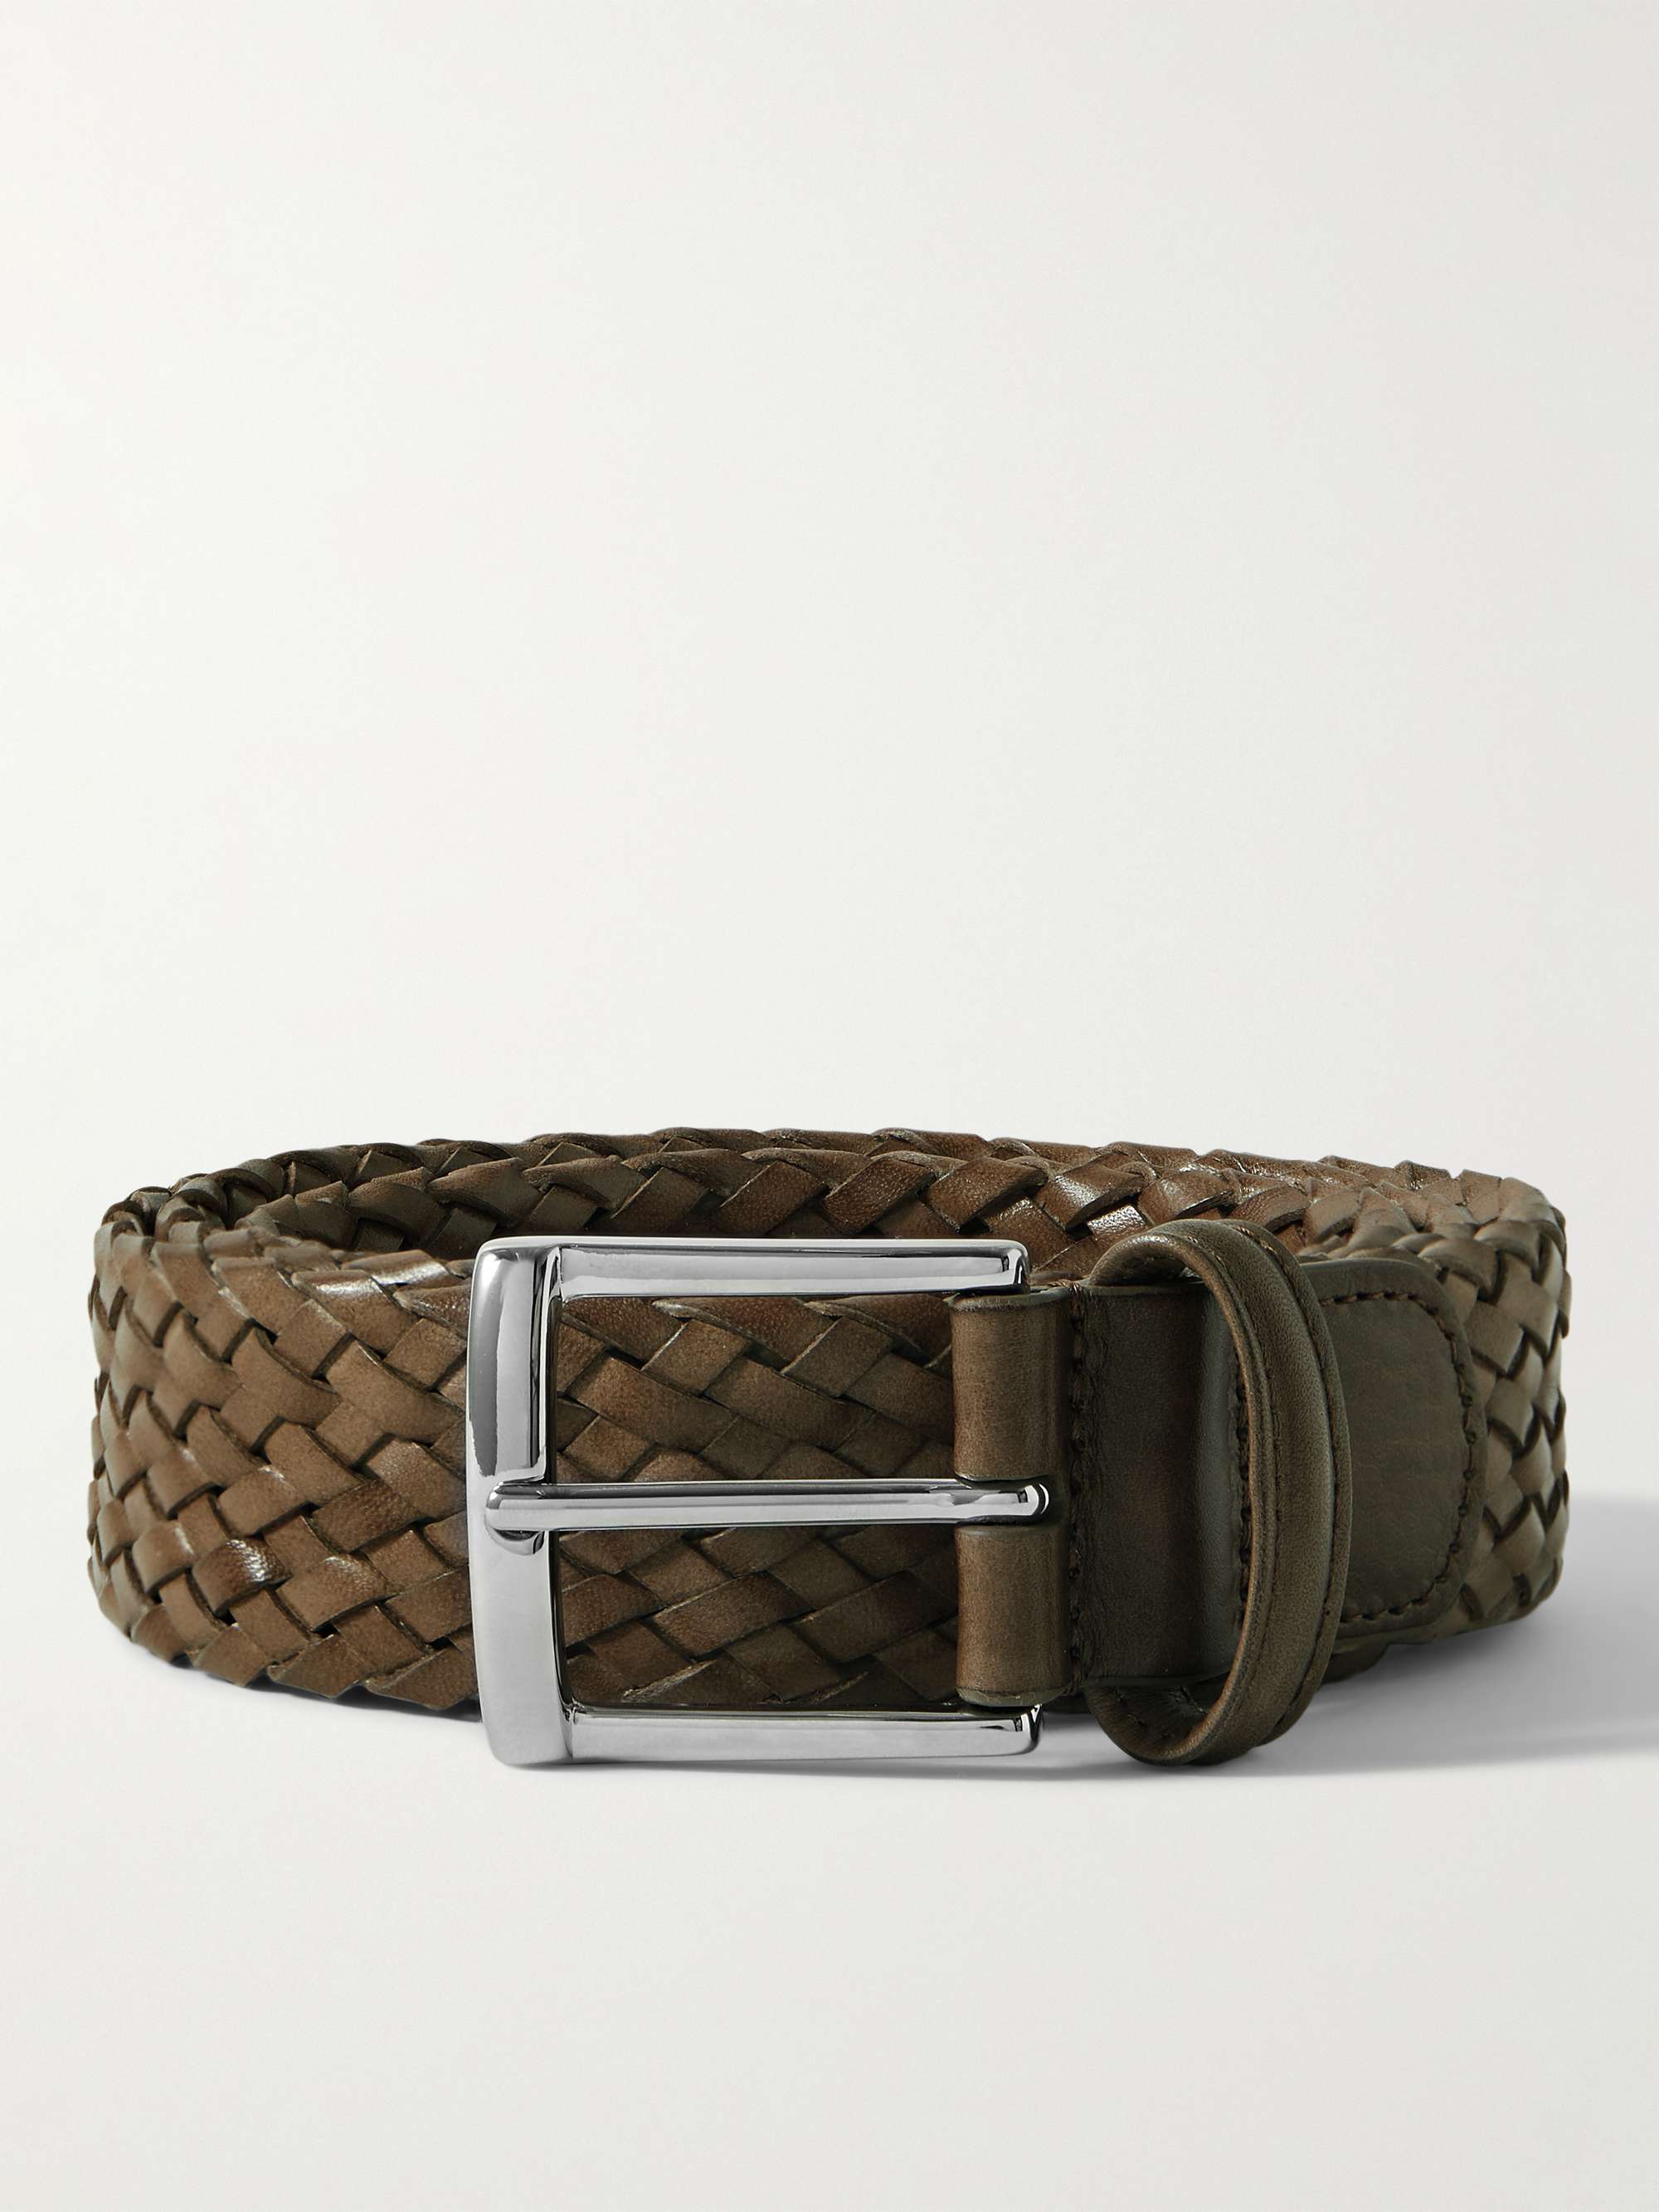 Anderson's - 3.5cm Brown Woven Leather Belt - Brown Anderson's